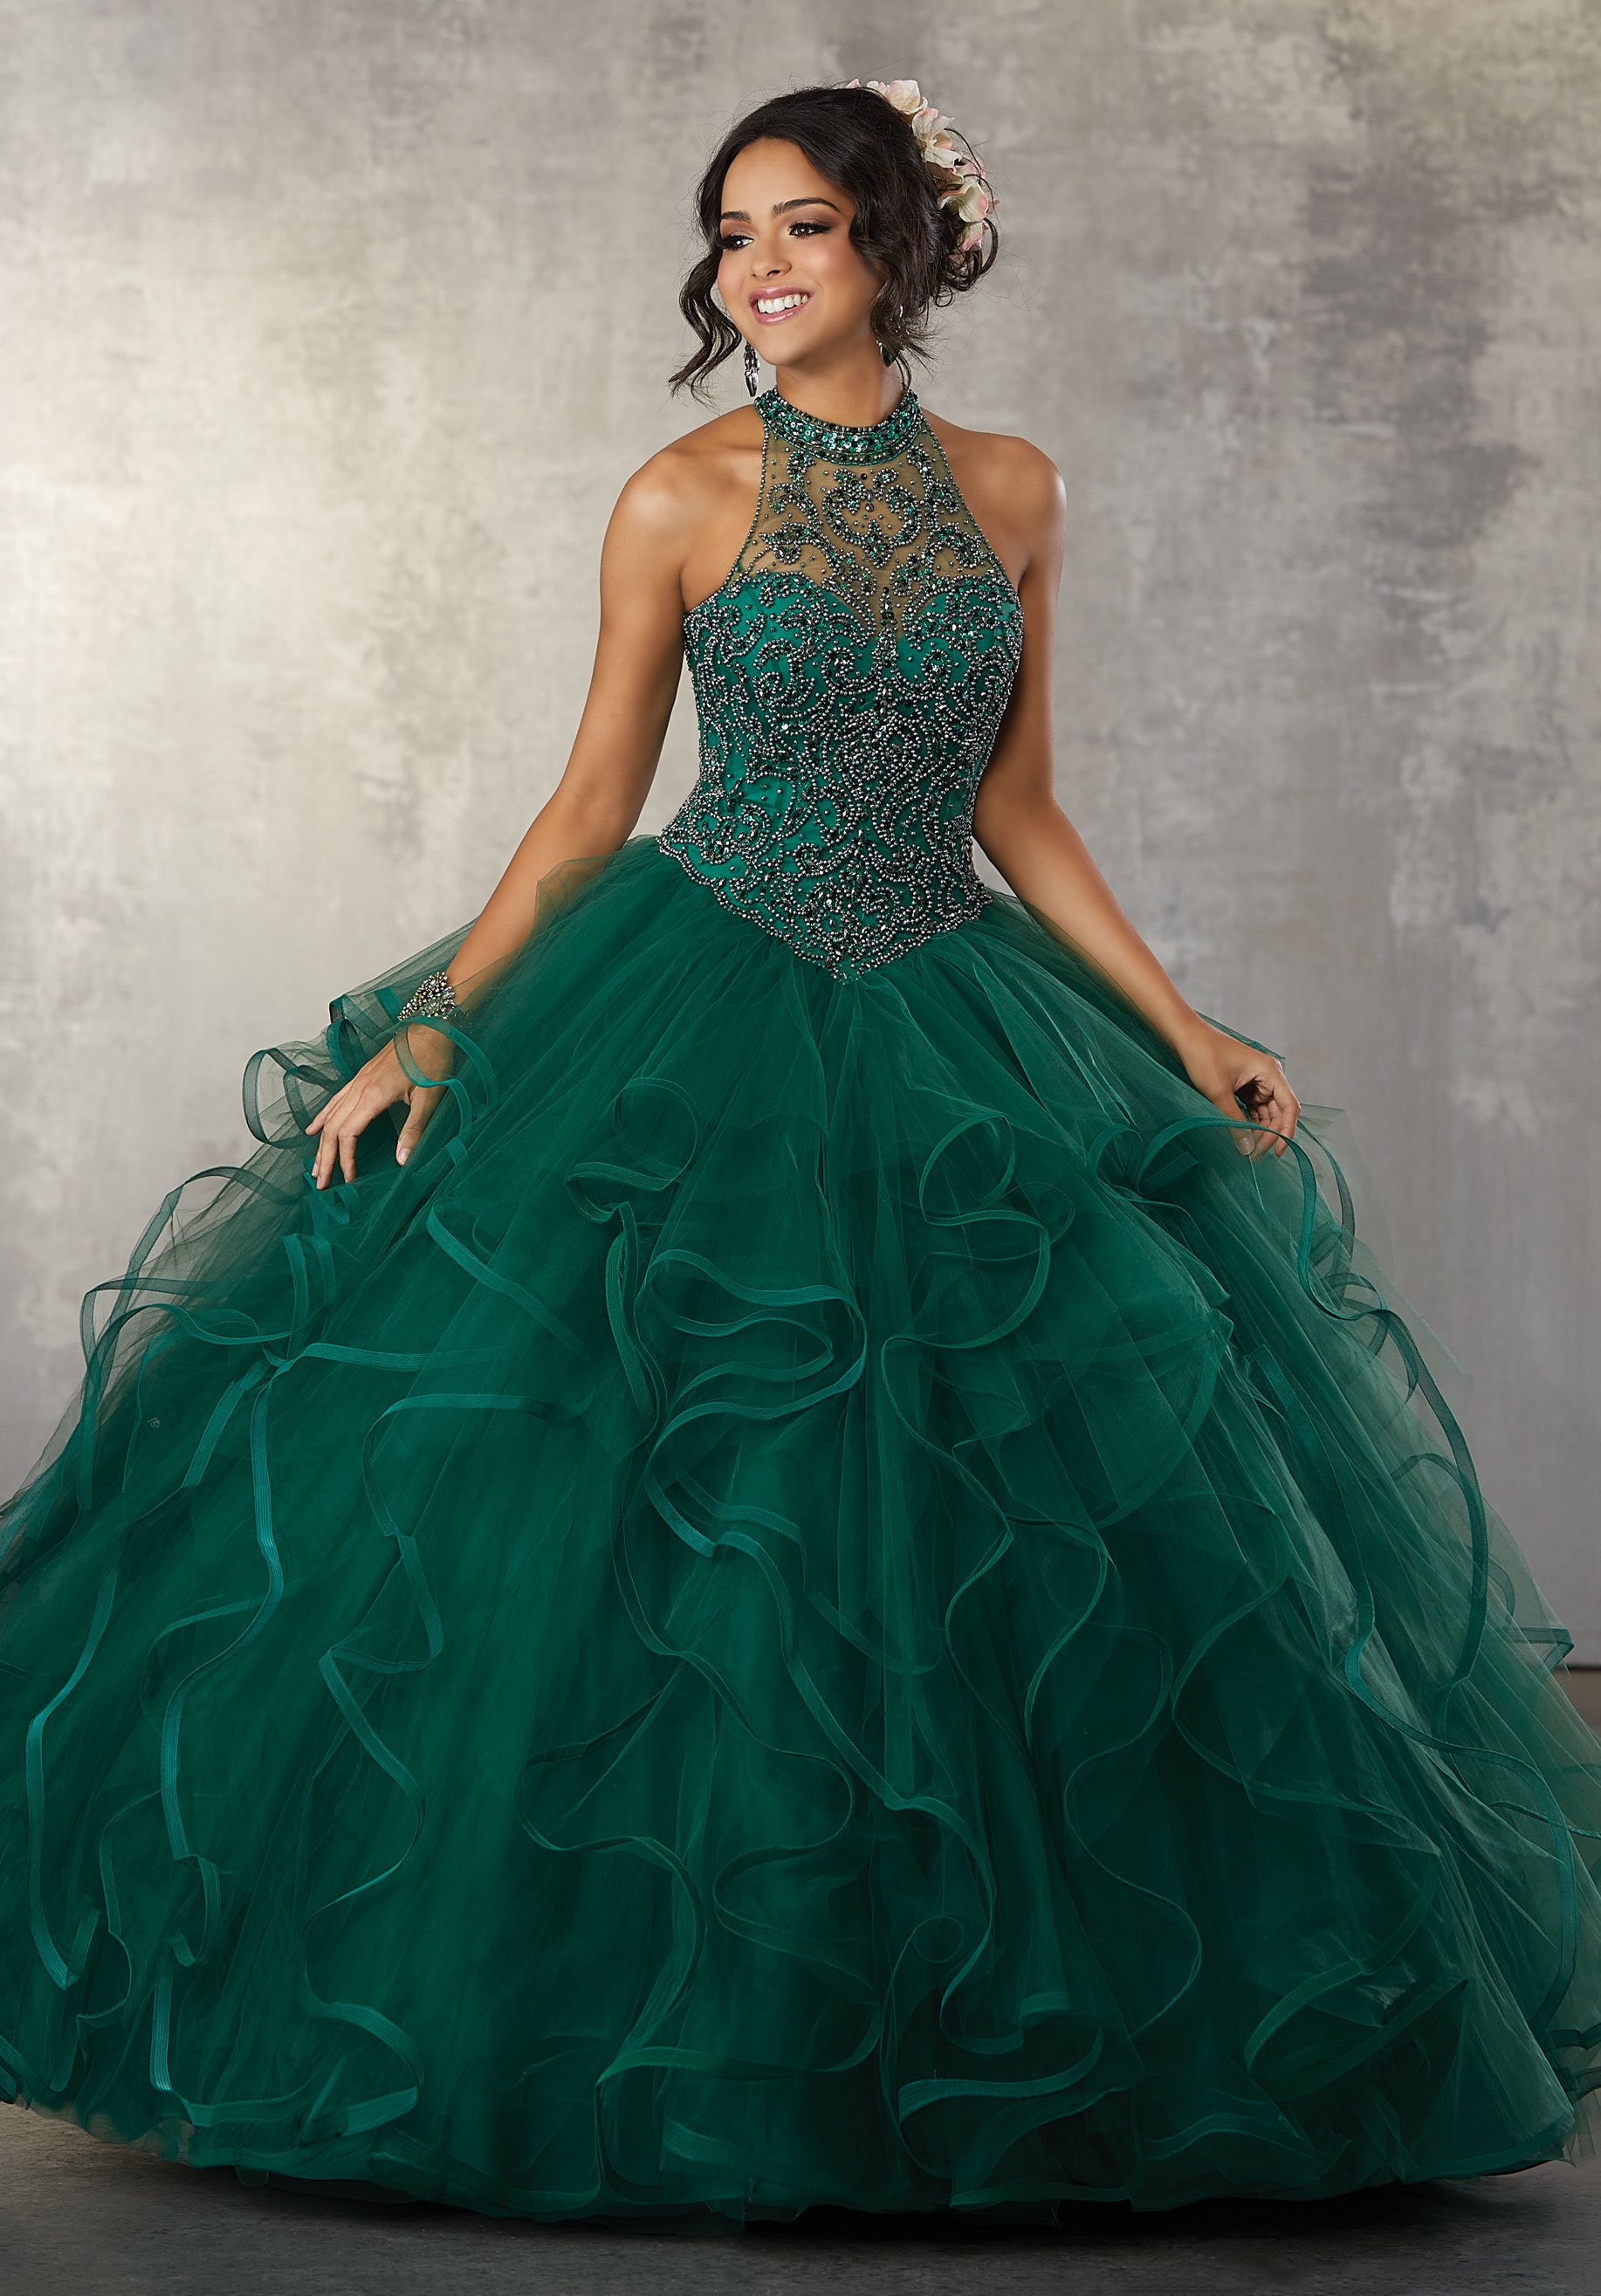 An Elegant Emerald Quinceanera Theme We're Obsessed With